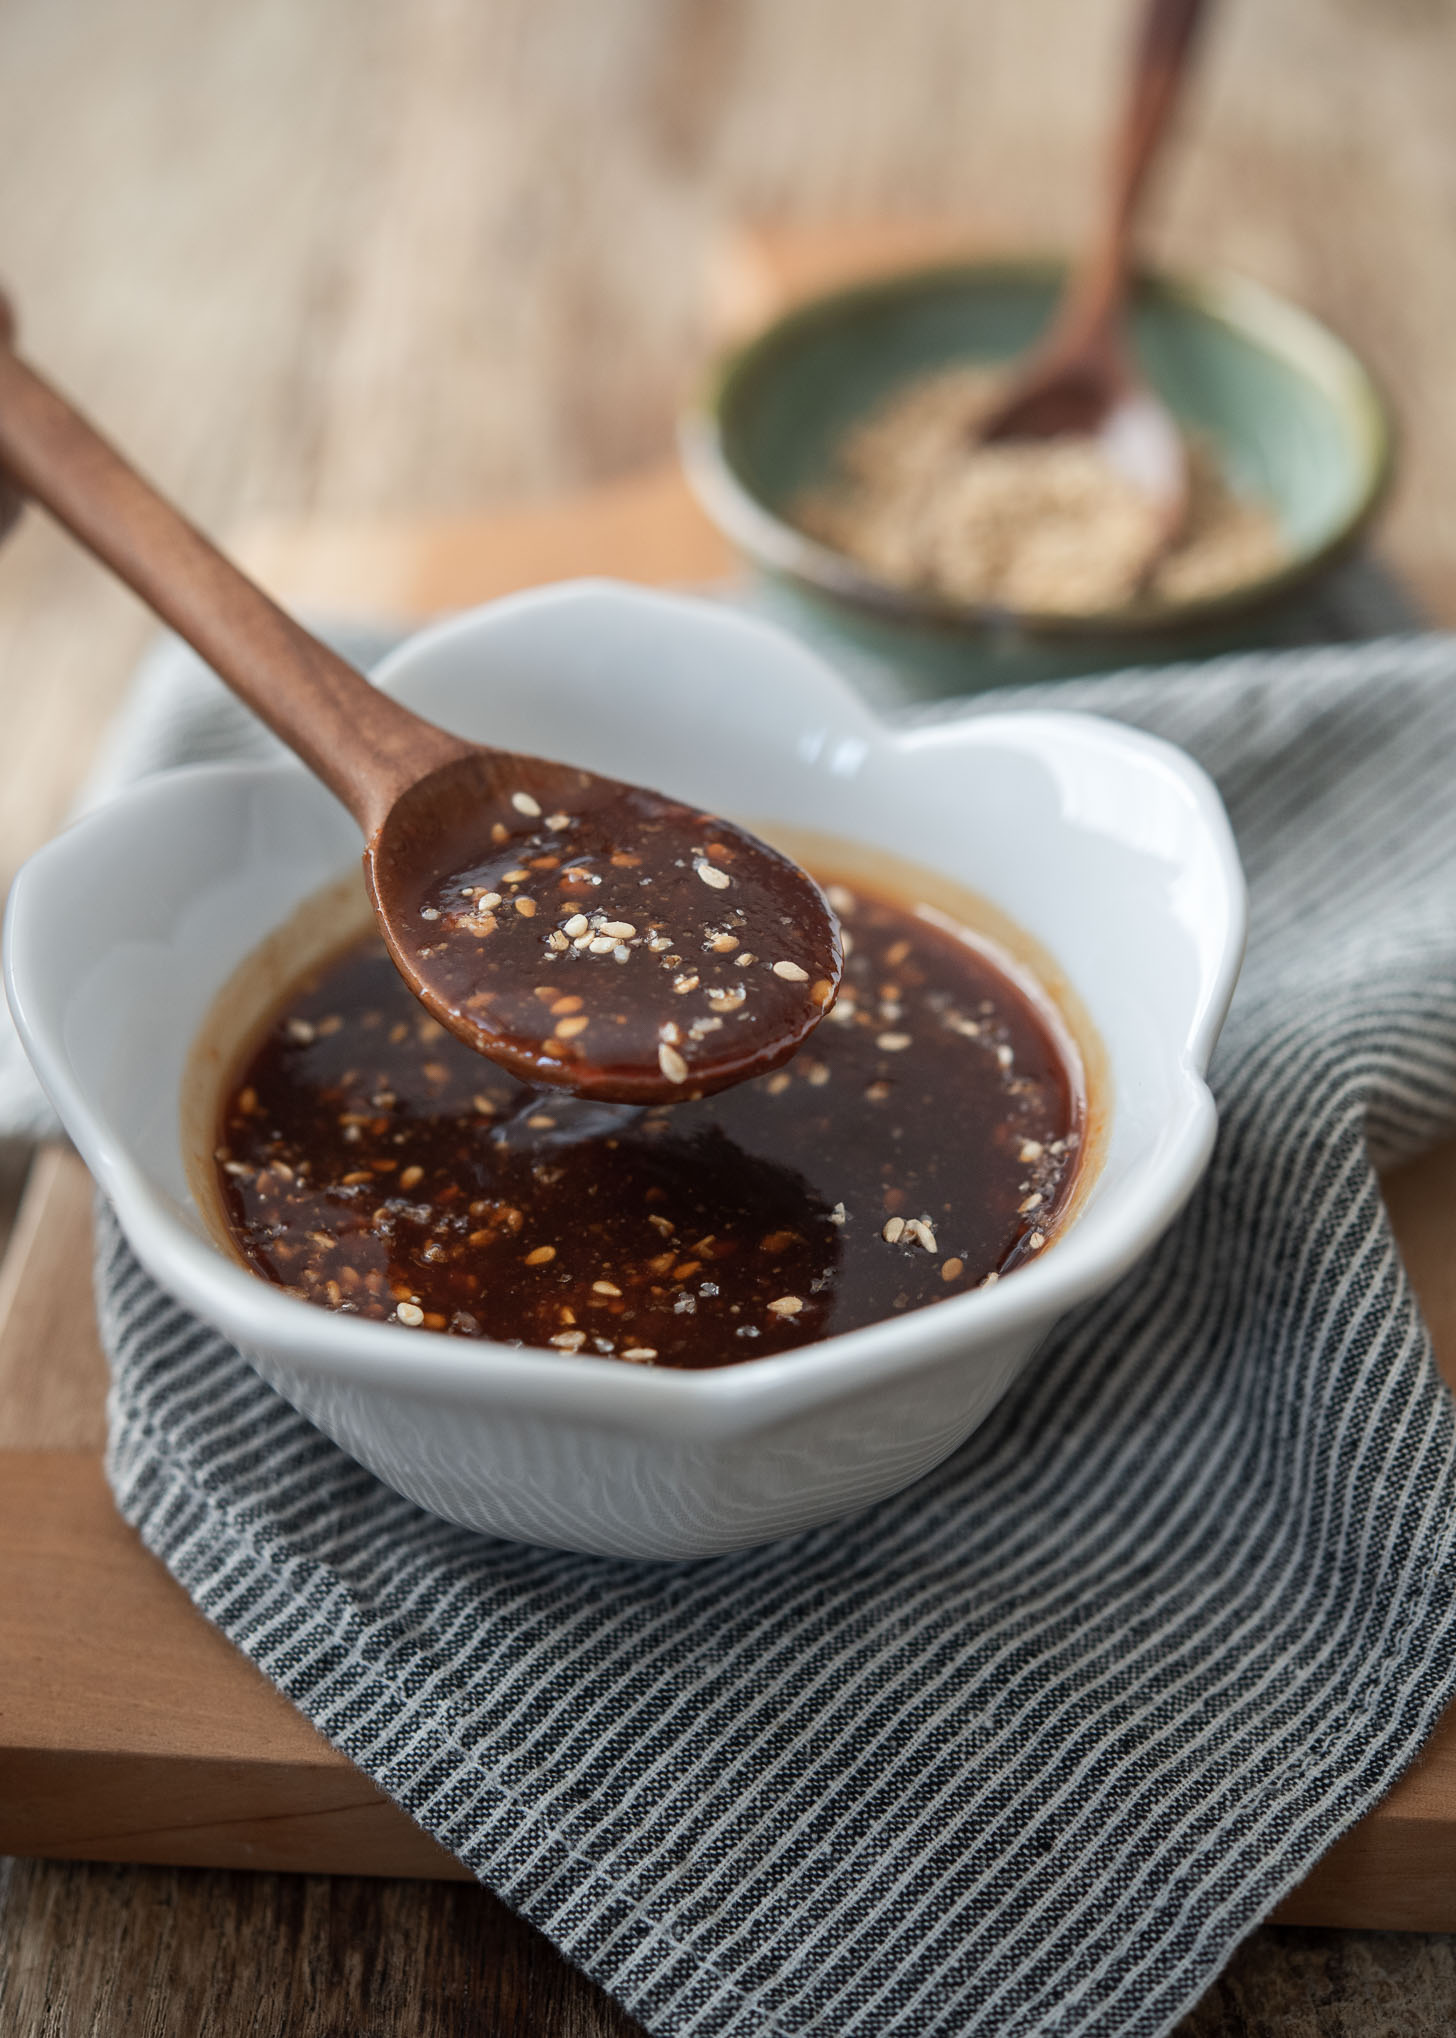 Tonkatsu sauce combined with crushed sesame seeds in a small bowl.